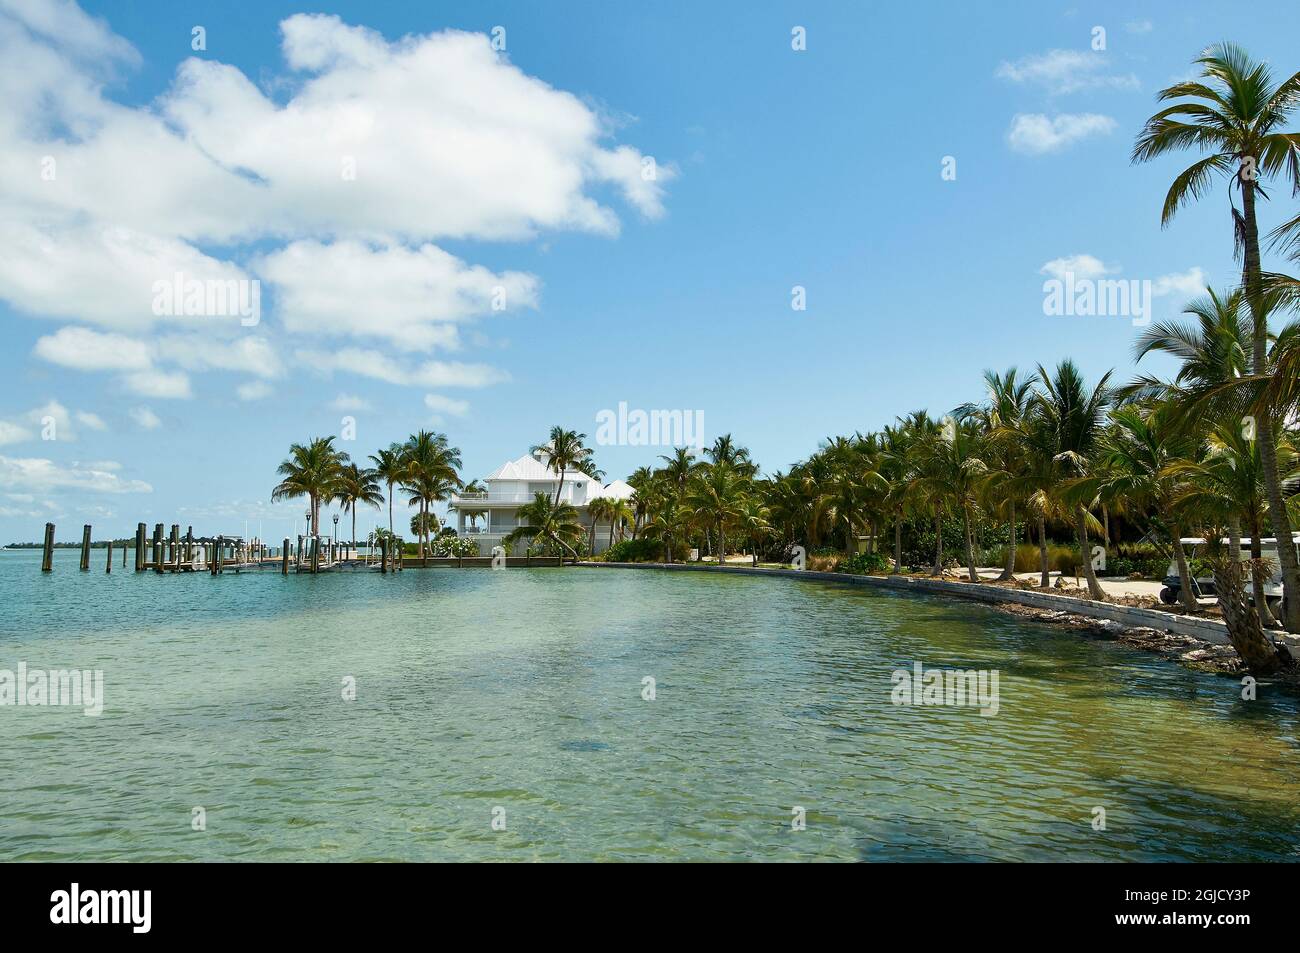 USA, Florida, Useppa Island. It was added to the U.S. Register of Historic Places in 1996. Stock Photo